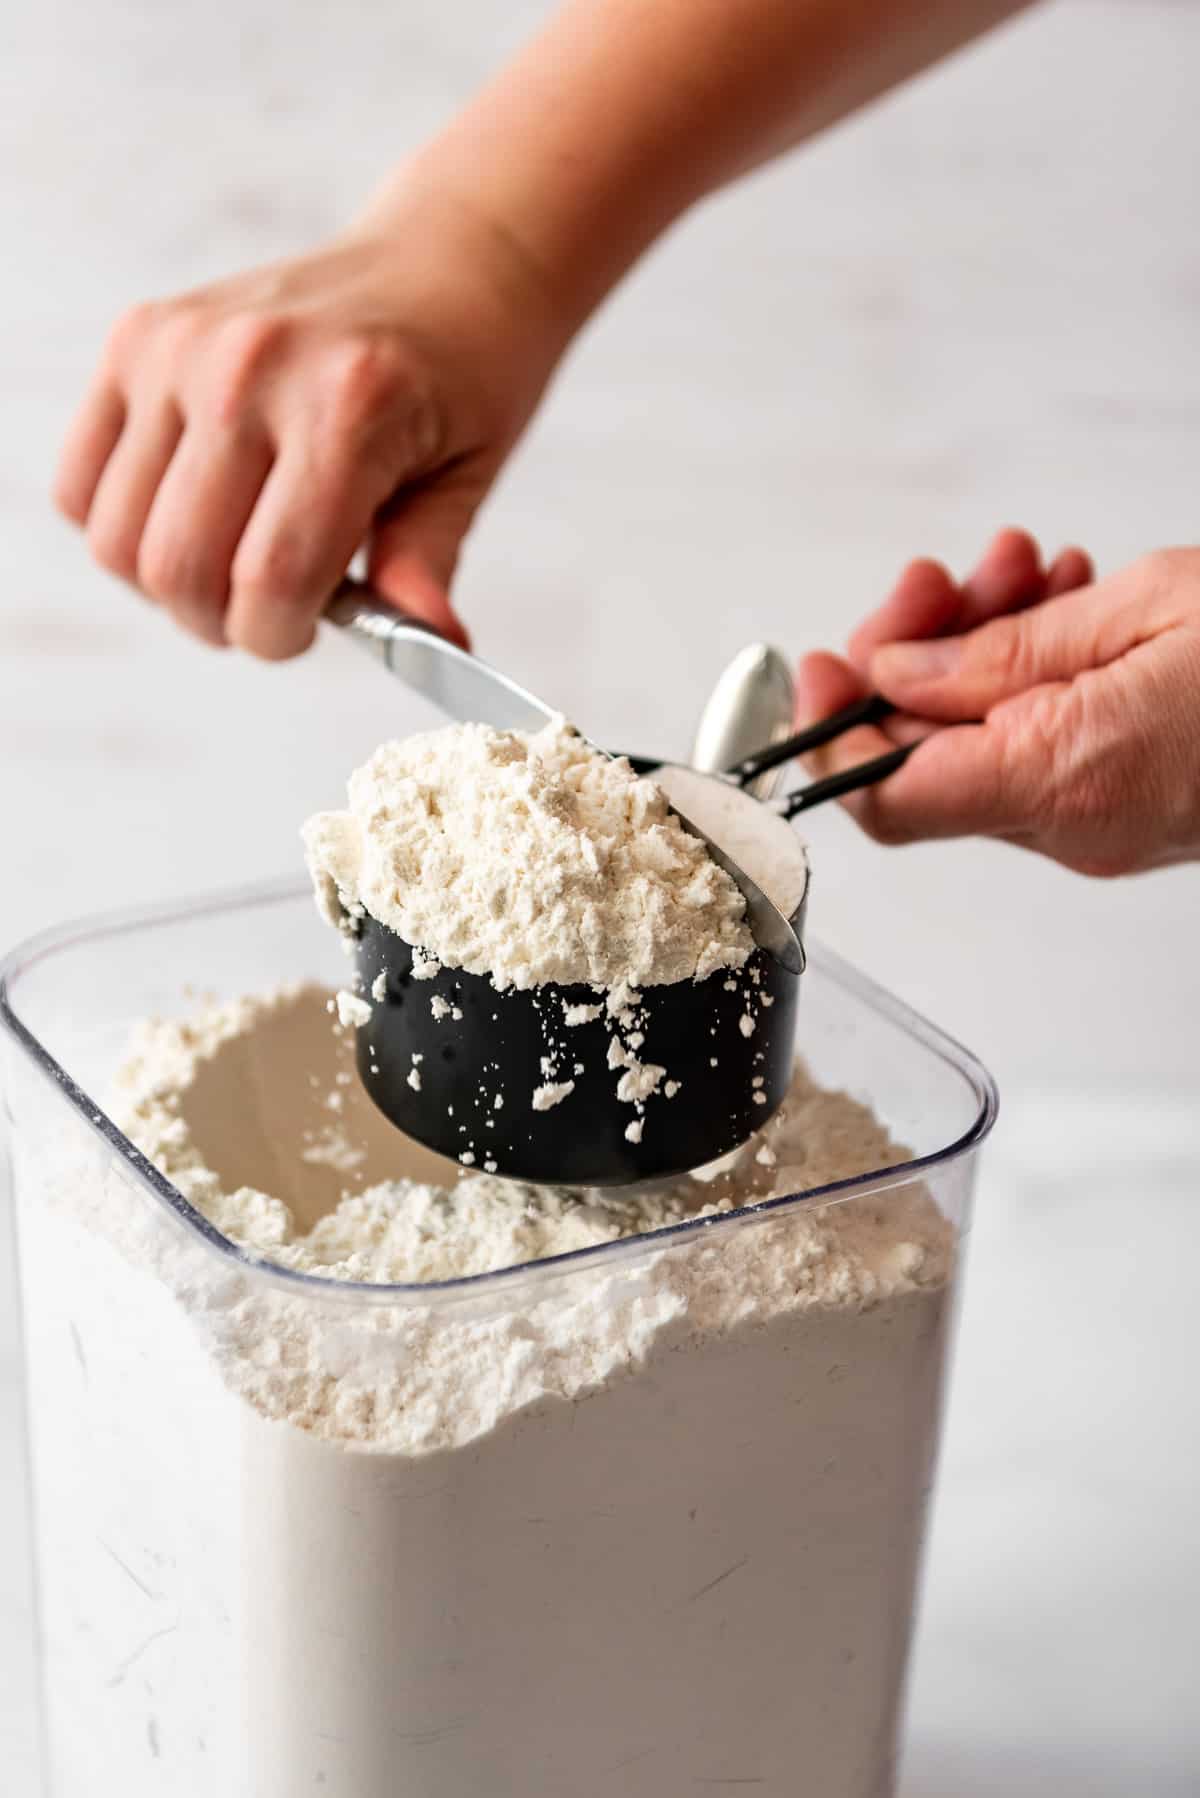 How to Measure Baking Ingredients Correctly - House of Nash Eats